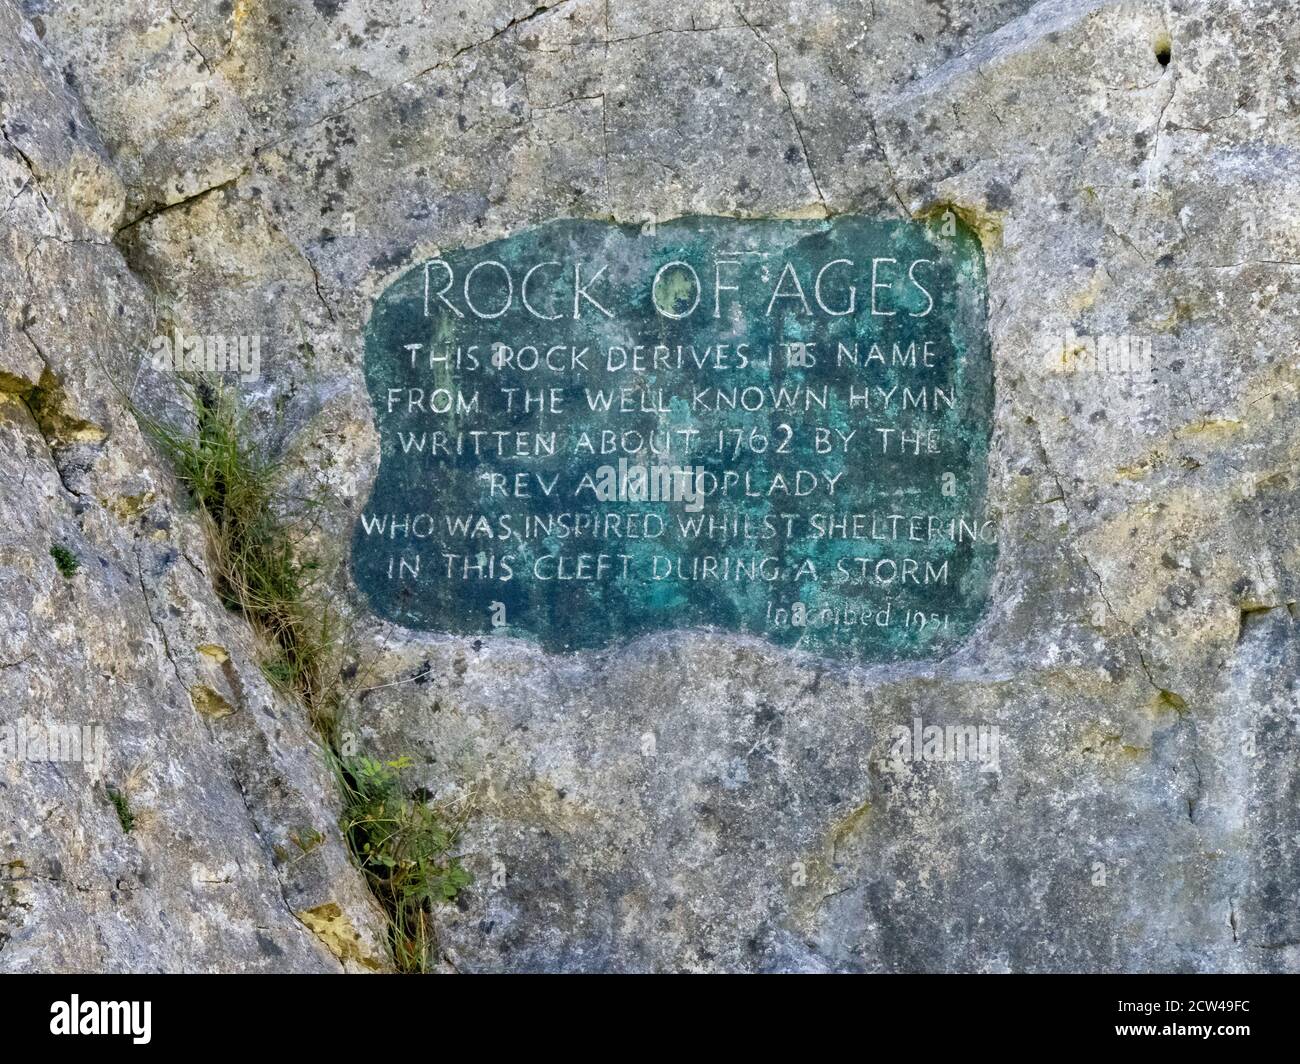 Plaque on the Rock of Ages commemorating A M Toplady's well-loved hymn in Burrington Combe in the Mendip Hills Somerset UK Stock Photo